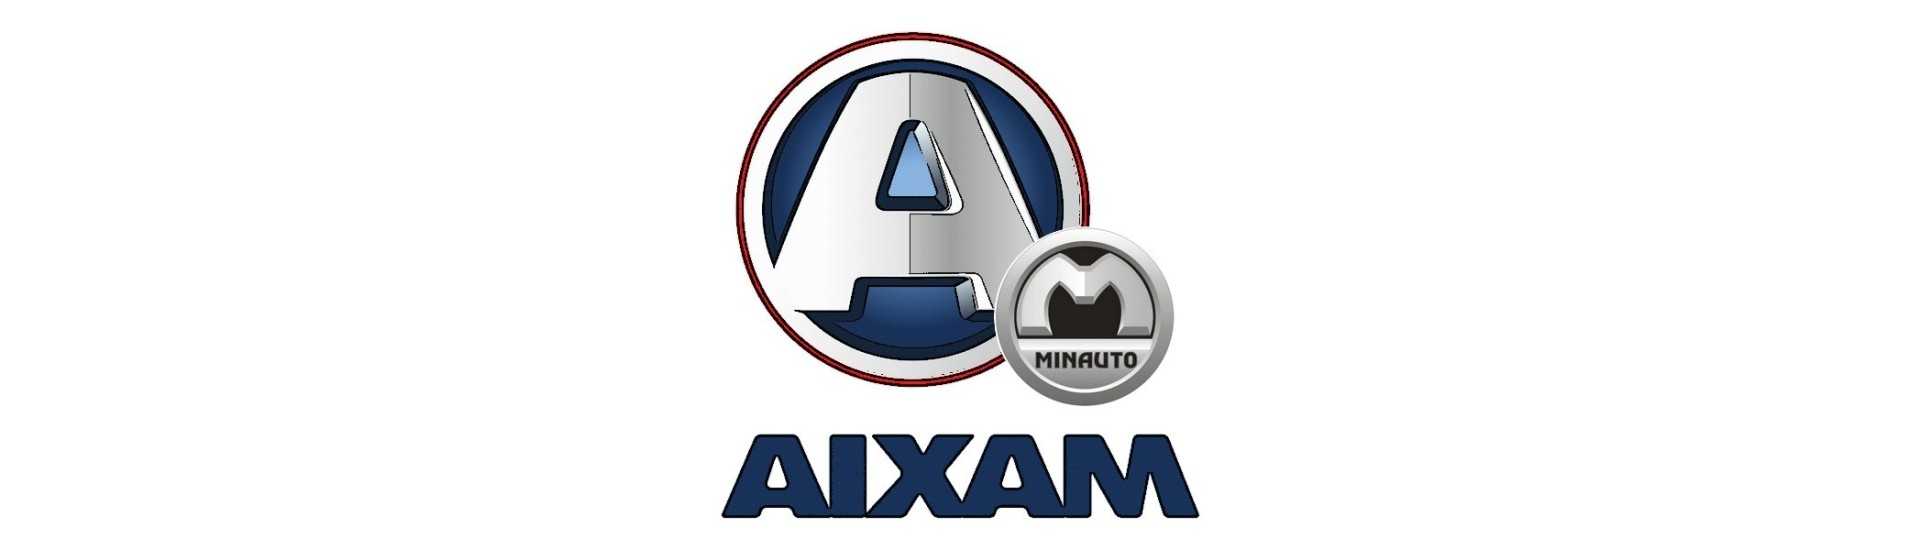 Heating cable at best prices car without a permit Aixam Minauto